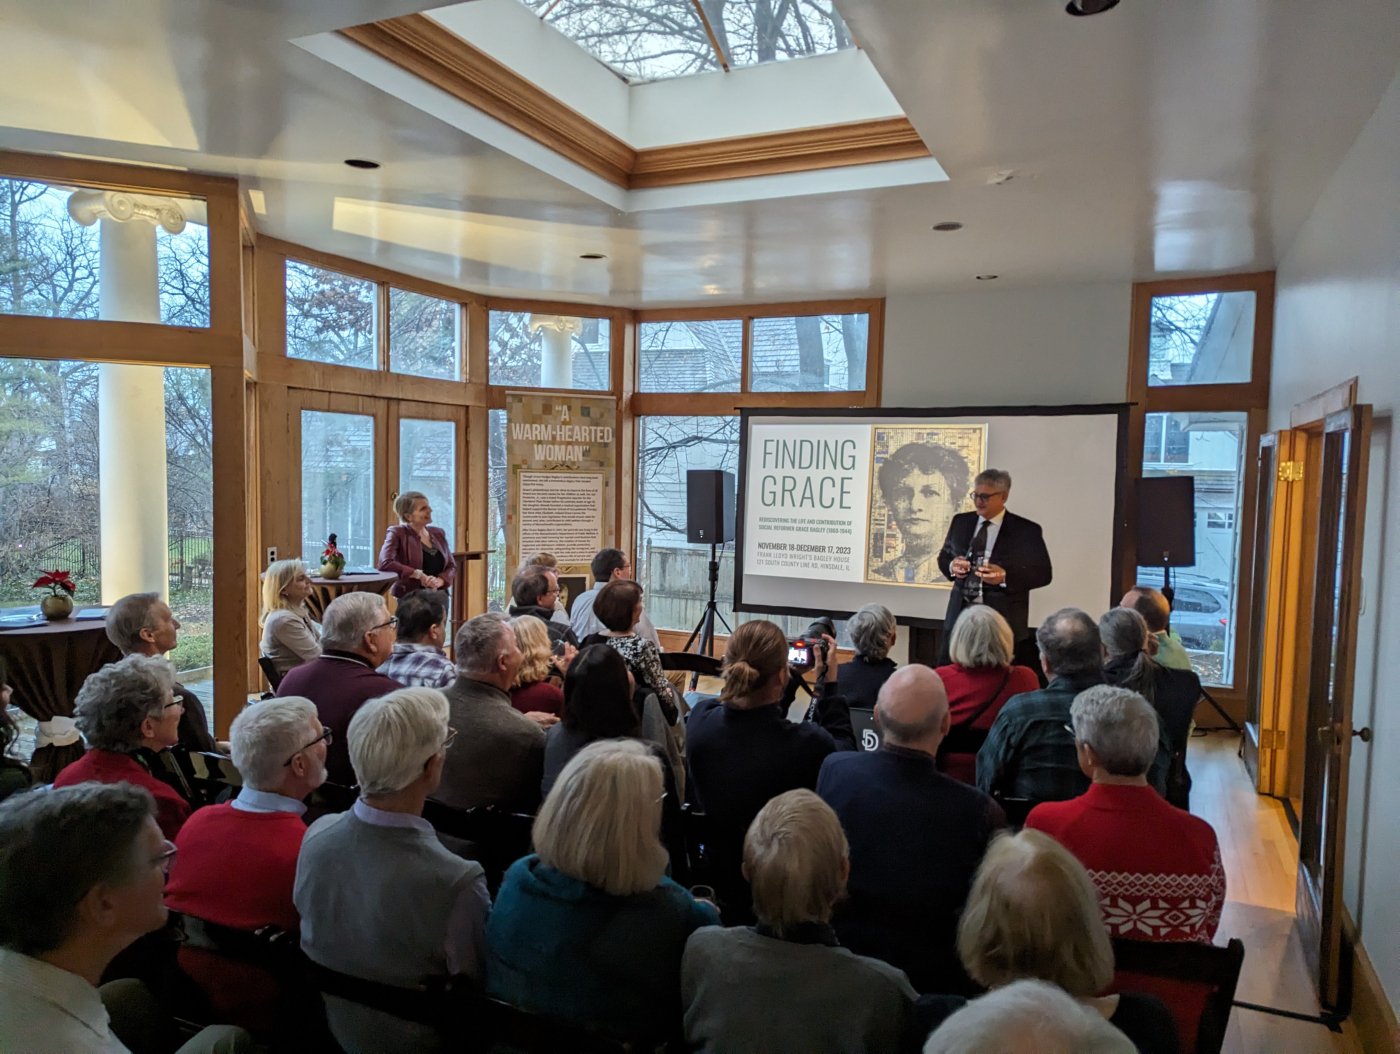 A crowd of people seated in the window-lined room at the back of the Bagley House, being addressed by a man standing at the front with a screen showing the title slide for the "Finding Grace" exhibit